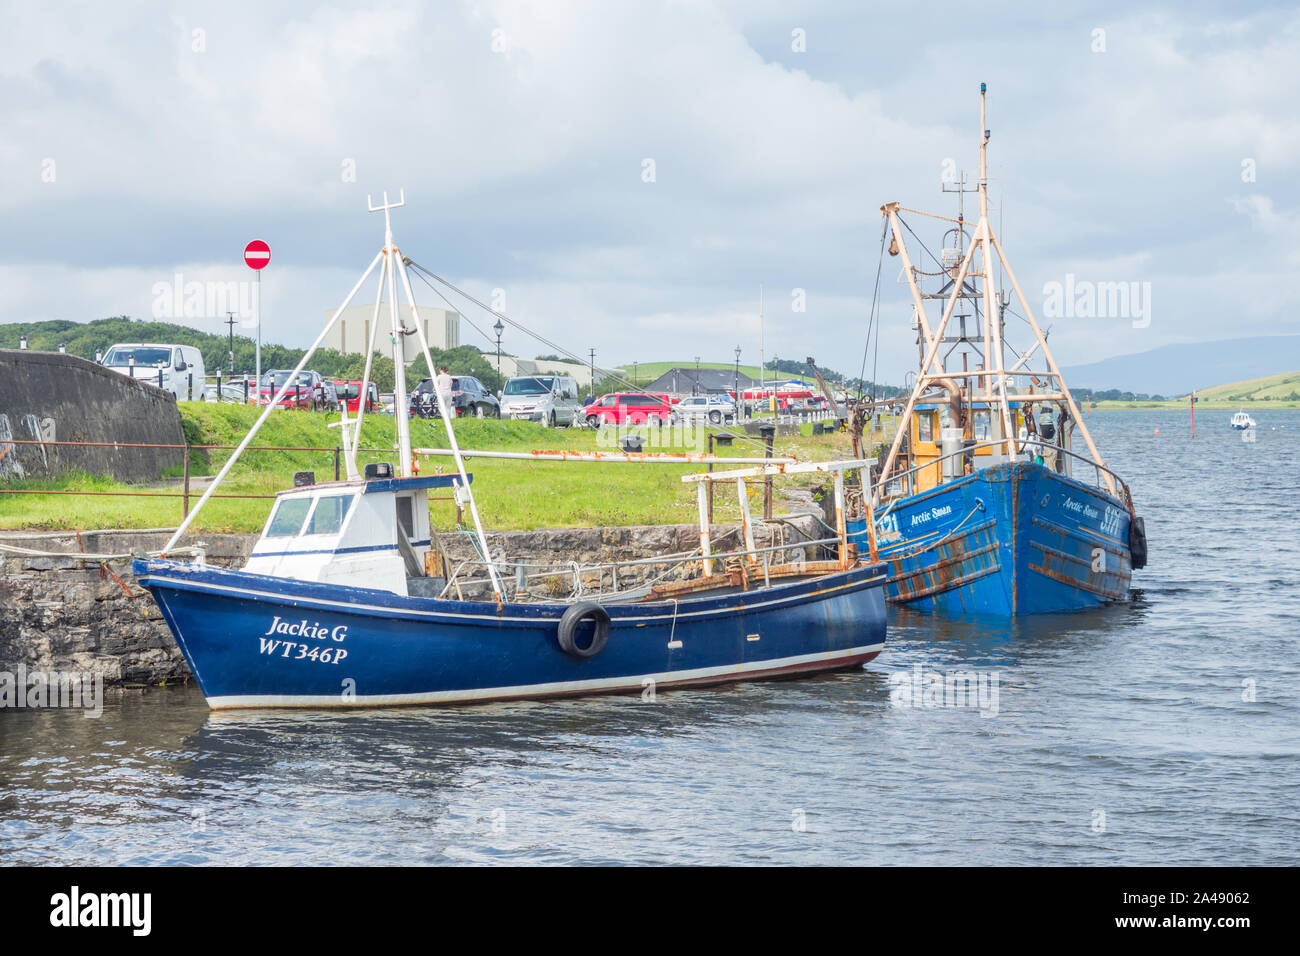 WESTPORT, IRELAND - AUGUST 7, 2019: Fishing boats lined up at Westport Harbour in County Mayo, Ireland. Stock Photo